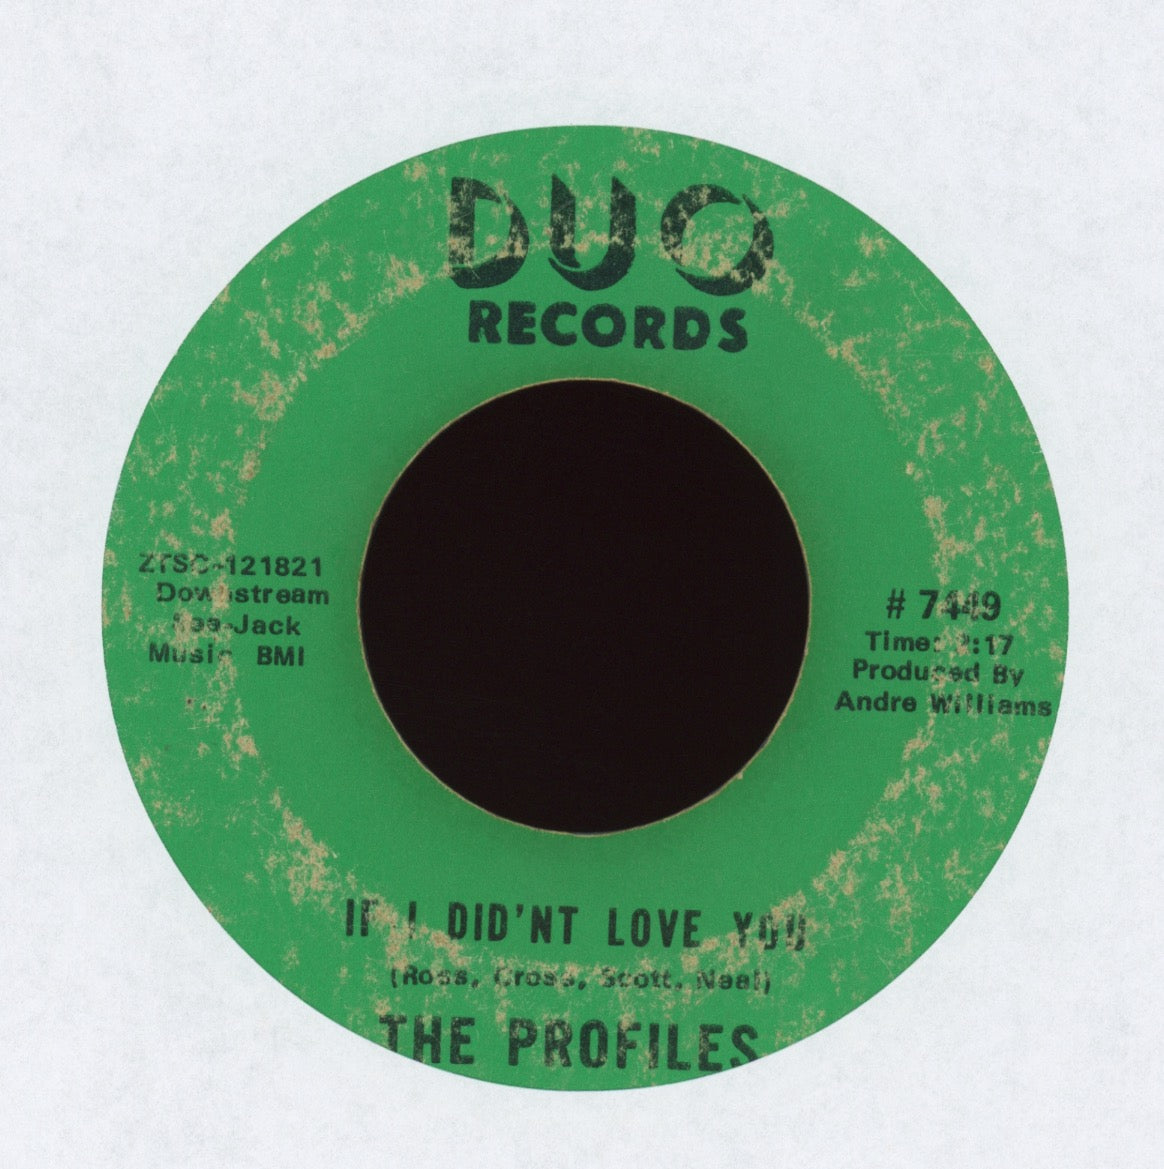 The Profiles - If I Didn't Love You on Duo